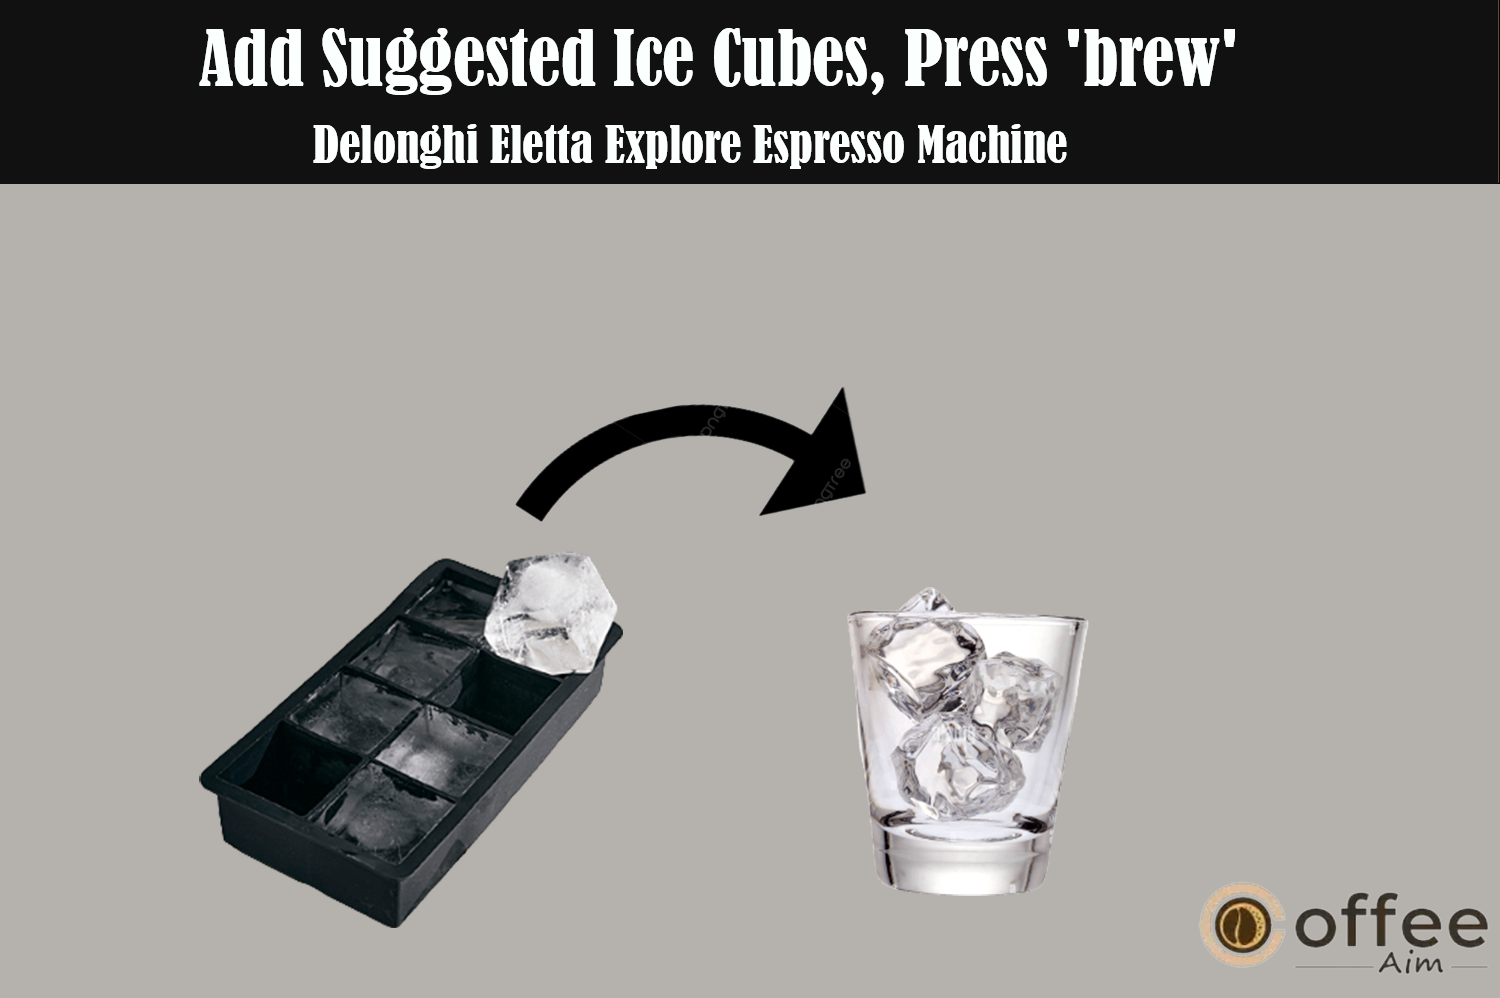 This image demonstrates adding the recommended number of ice cubes to your glass before pressing "Brew" on the De'Longhi Eletta Explore Espresso Machine, as detailed in the article 'How to Use the De'Longhi Eletta Explore Espresso Machine'.